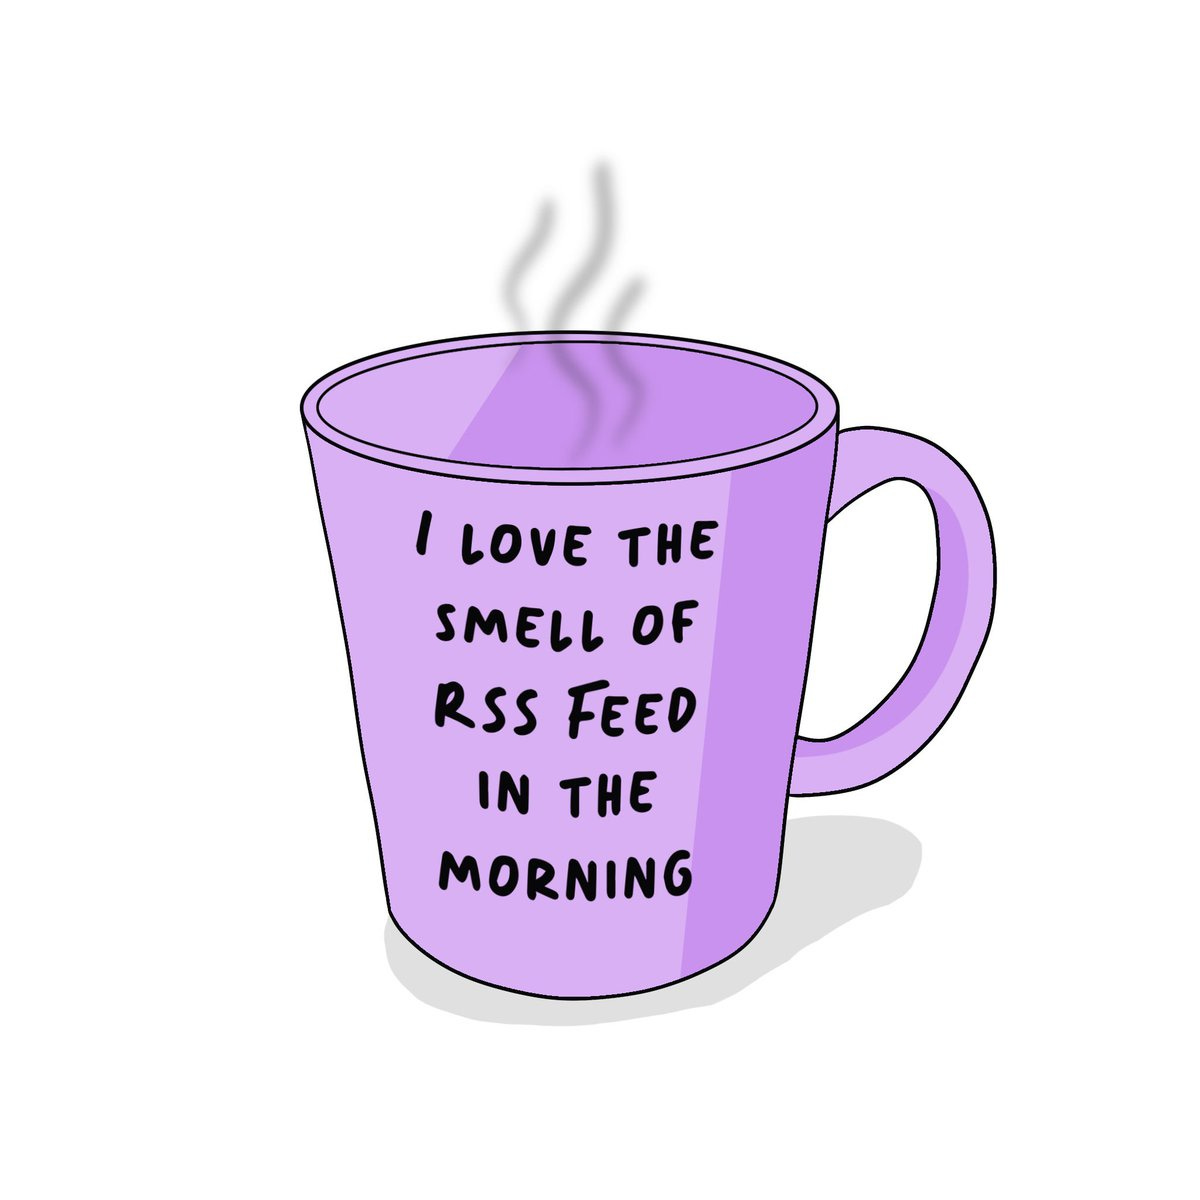 a coffee mug that says I love the smell of RSS feed in the morning